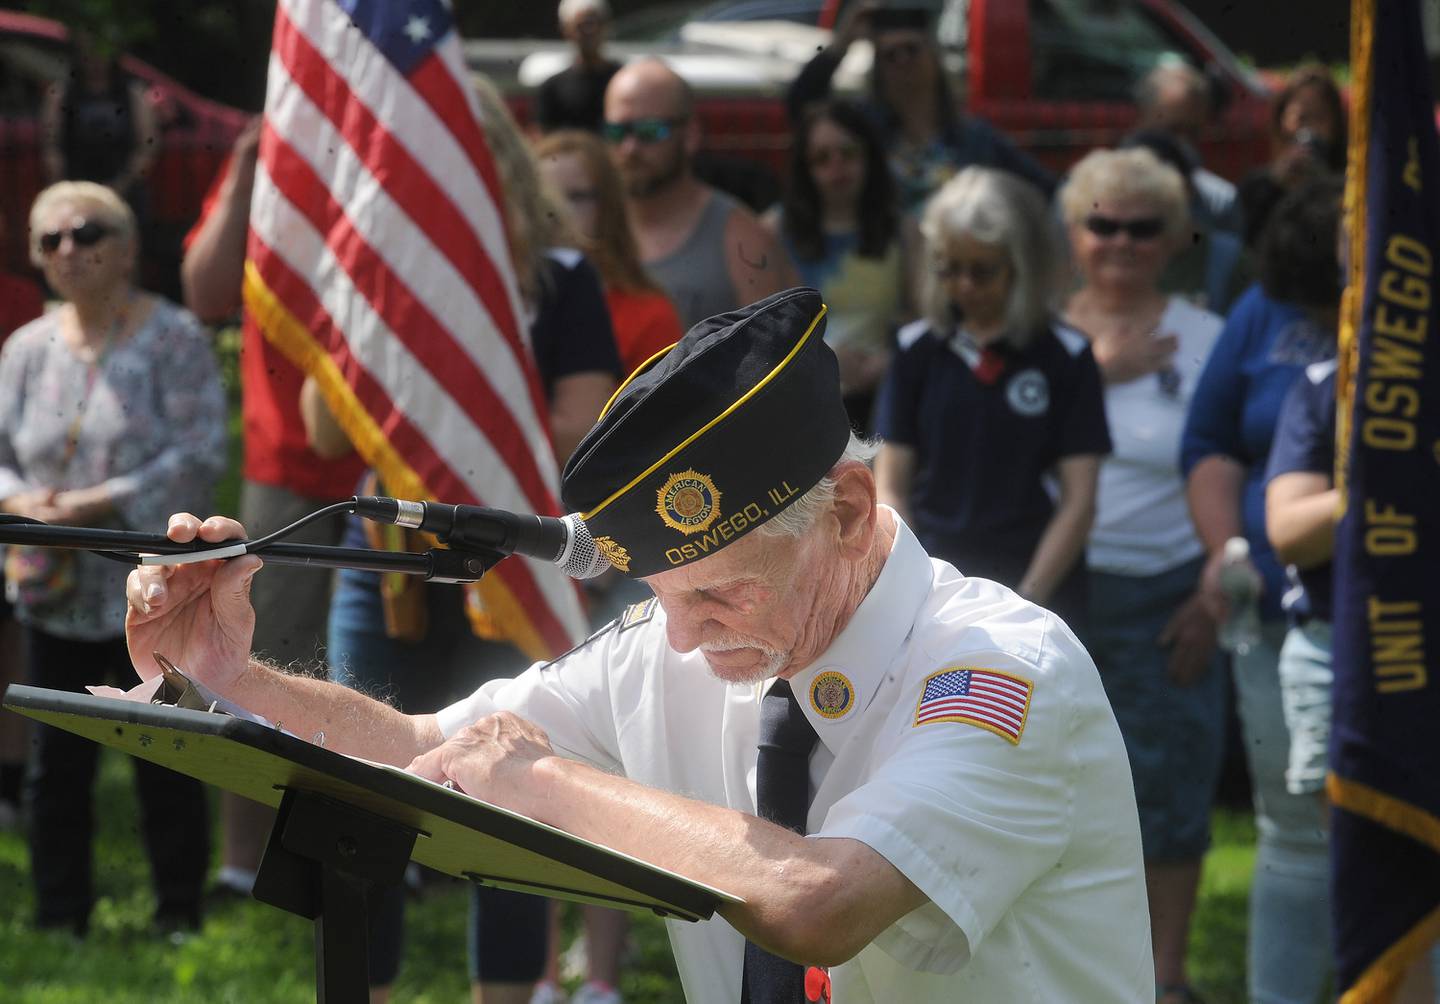 Oswego marks Memorial Day with solemn parade, service Shaw Local